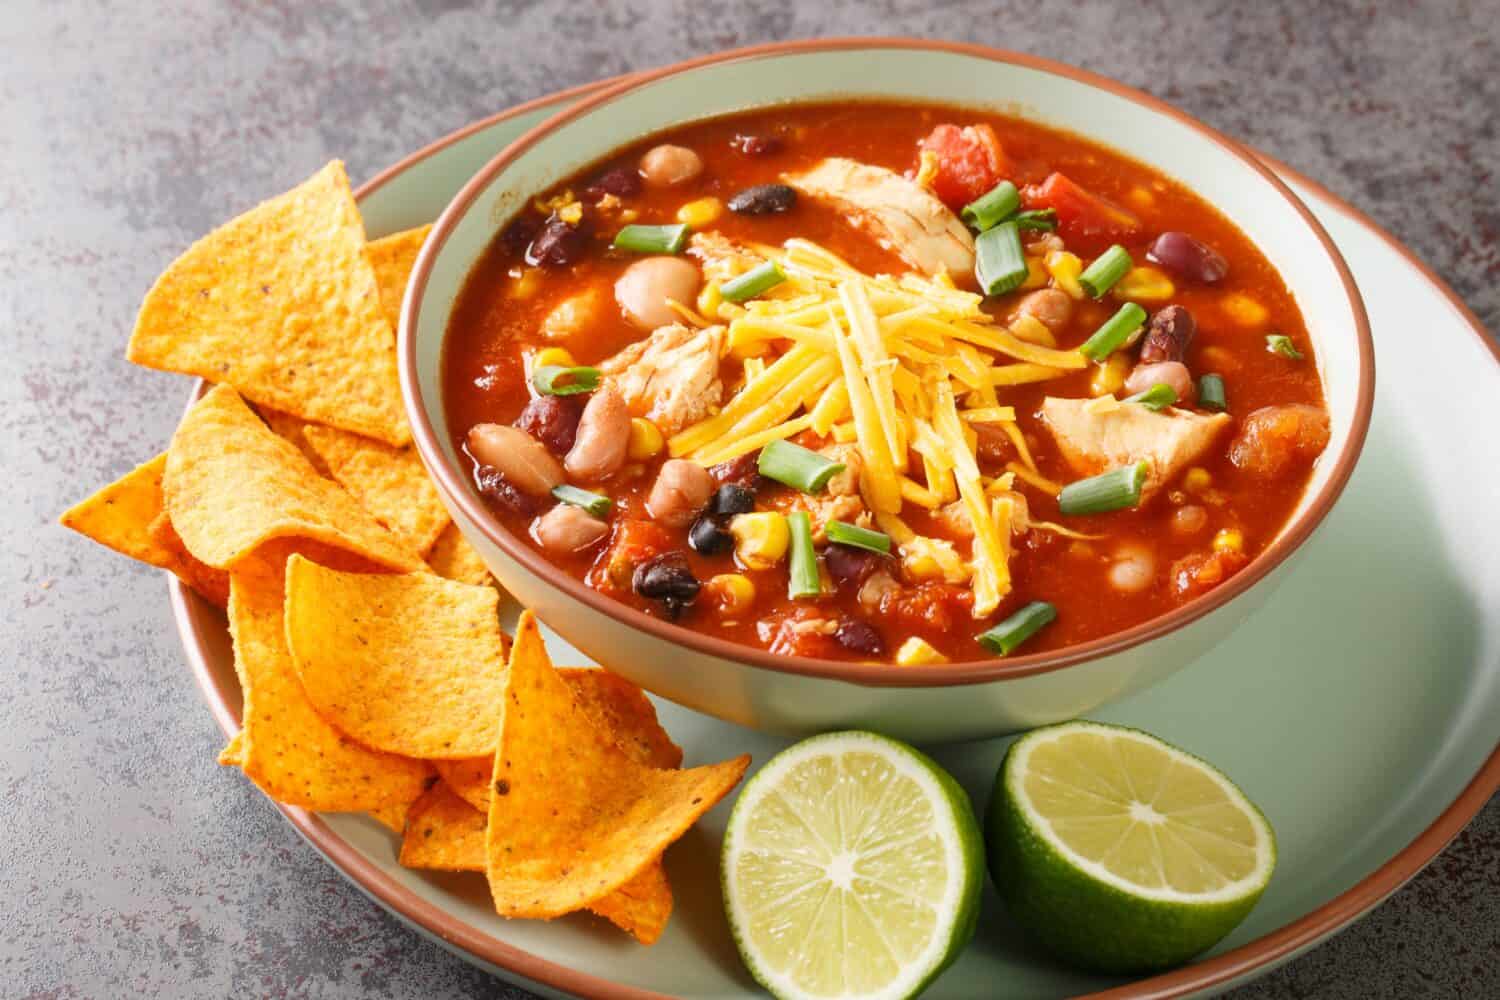 Tasty chicken taco soup full of tender chicken, sweet corn, black beans, fire-roasted tomatoes, and the most delicious creamy broth close-up in a plate on the table. Horizontal